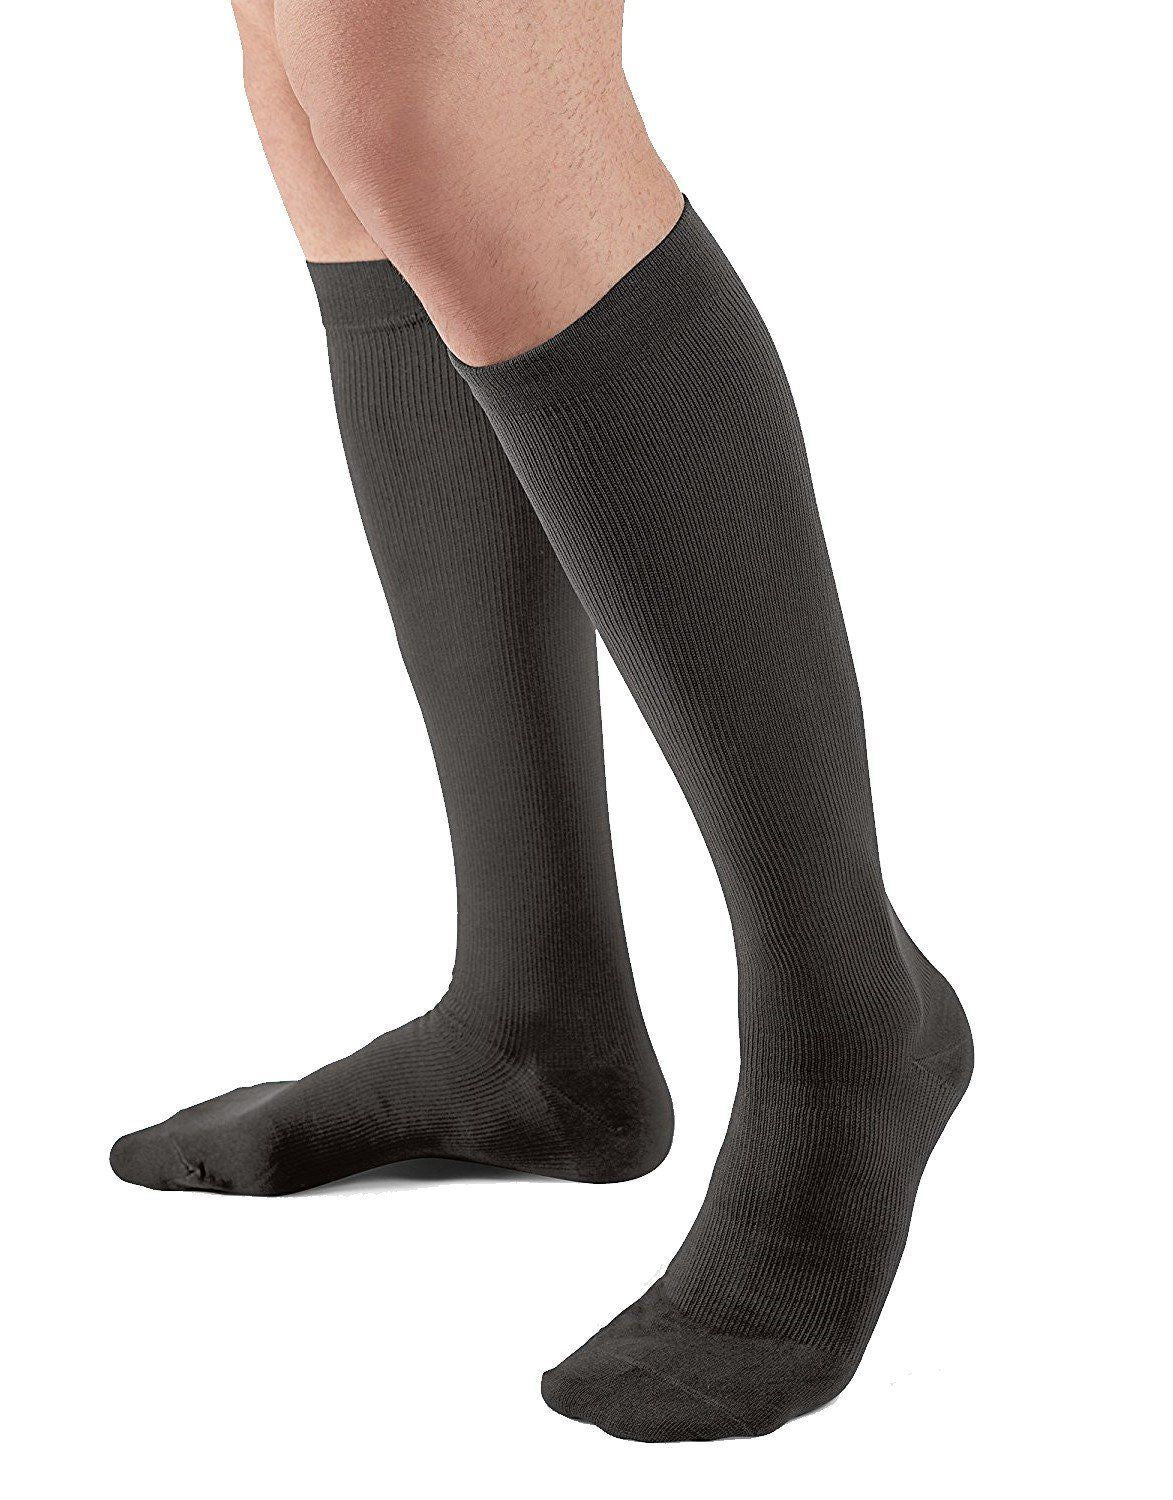 ROYALUCK Graduated Compression Socks Knee High Support Stockings 9 Colors (S-XXL)